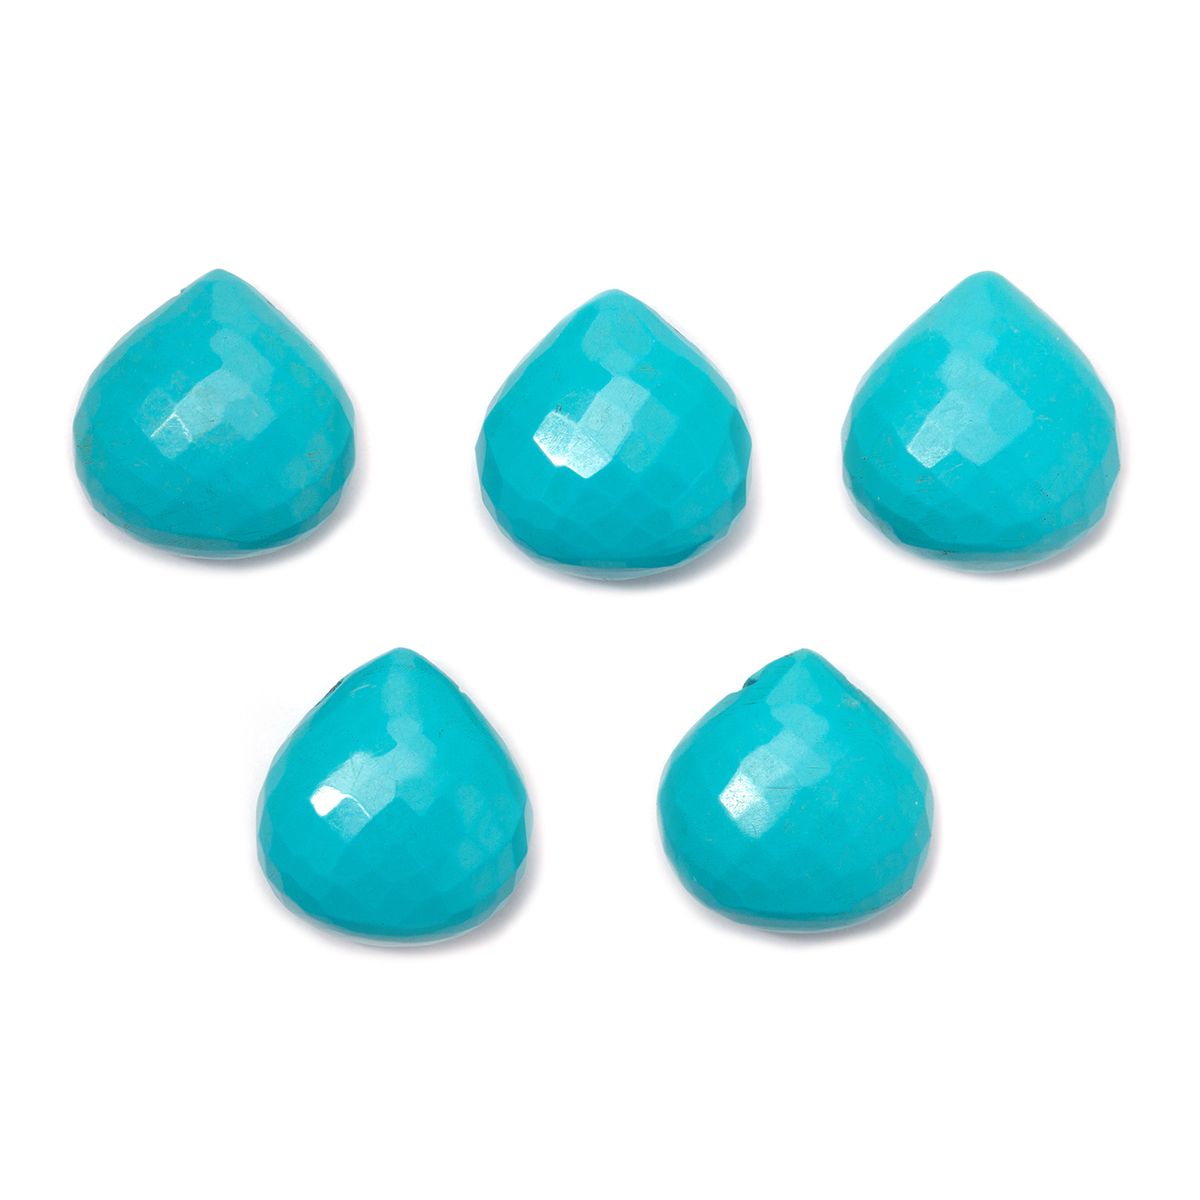 Sleeping Beauty Turquoise Faceted Heart Briolette Beads, Approx 11mm 